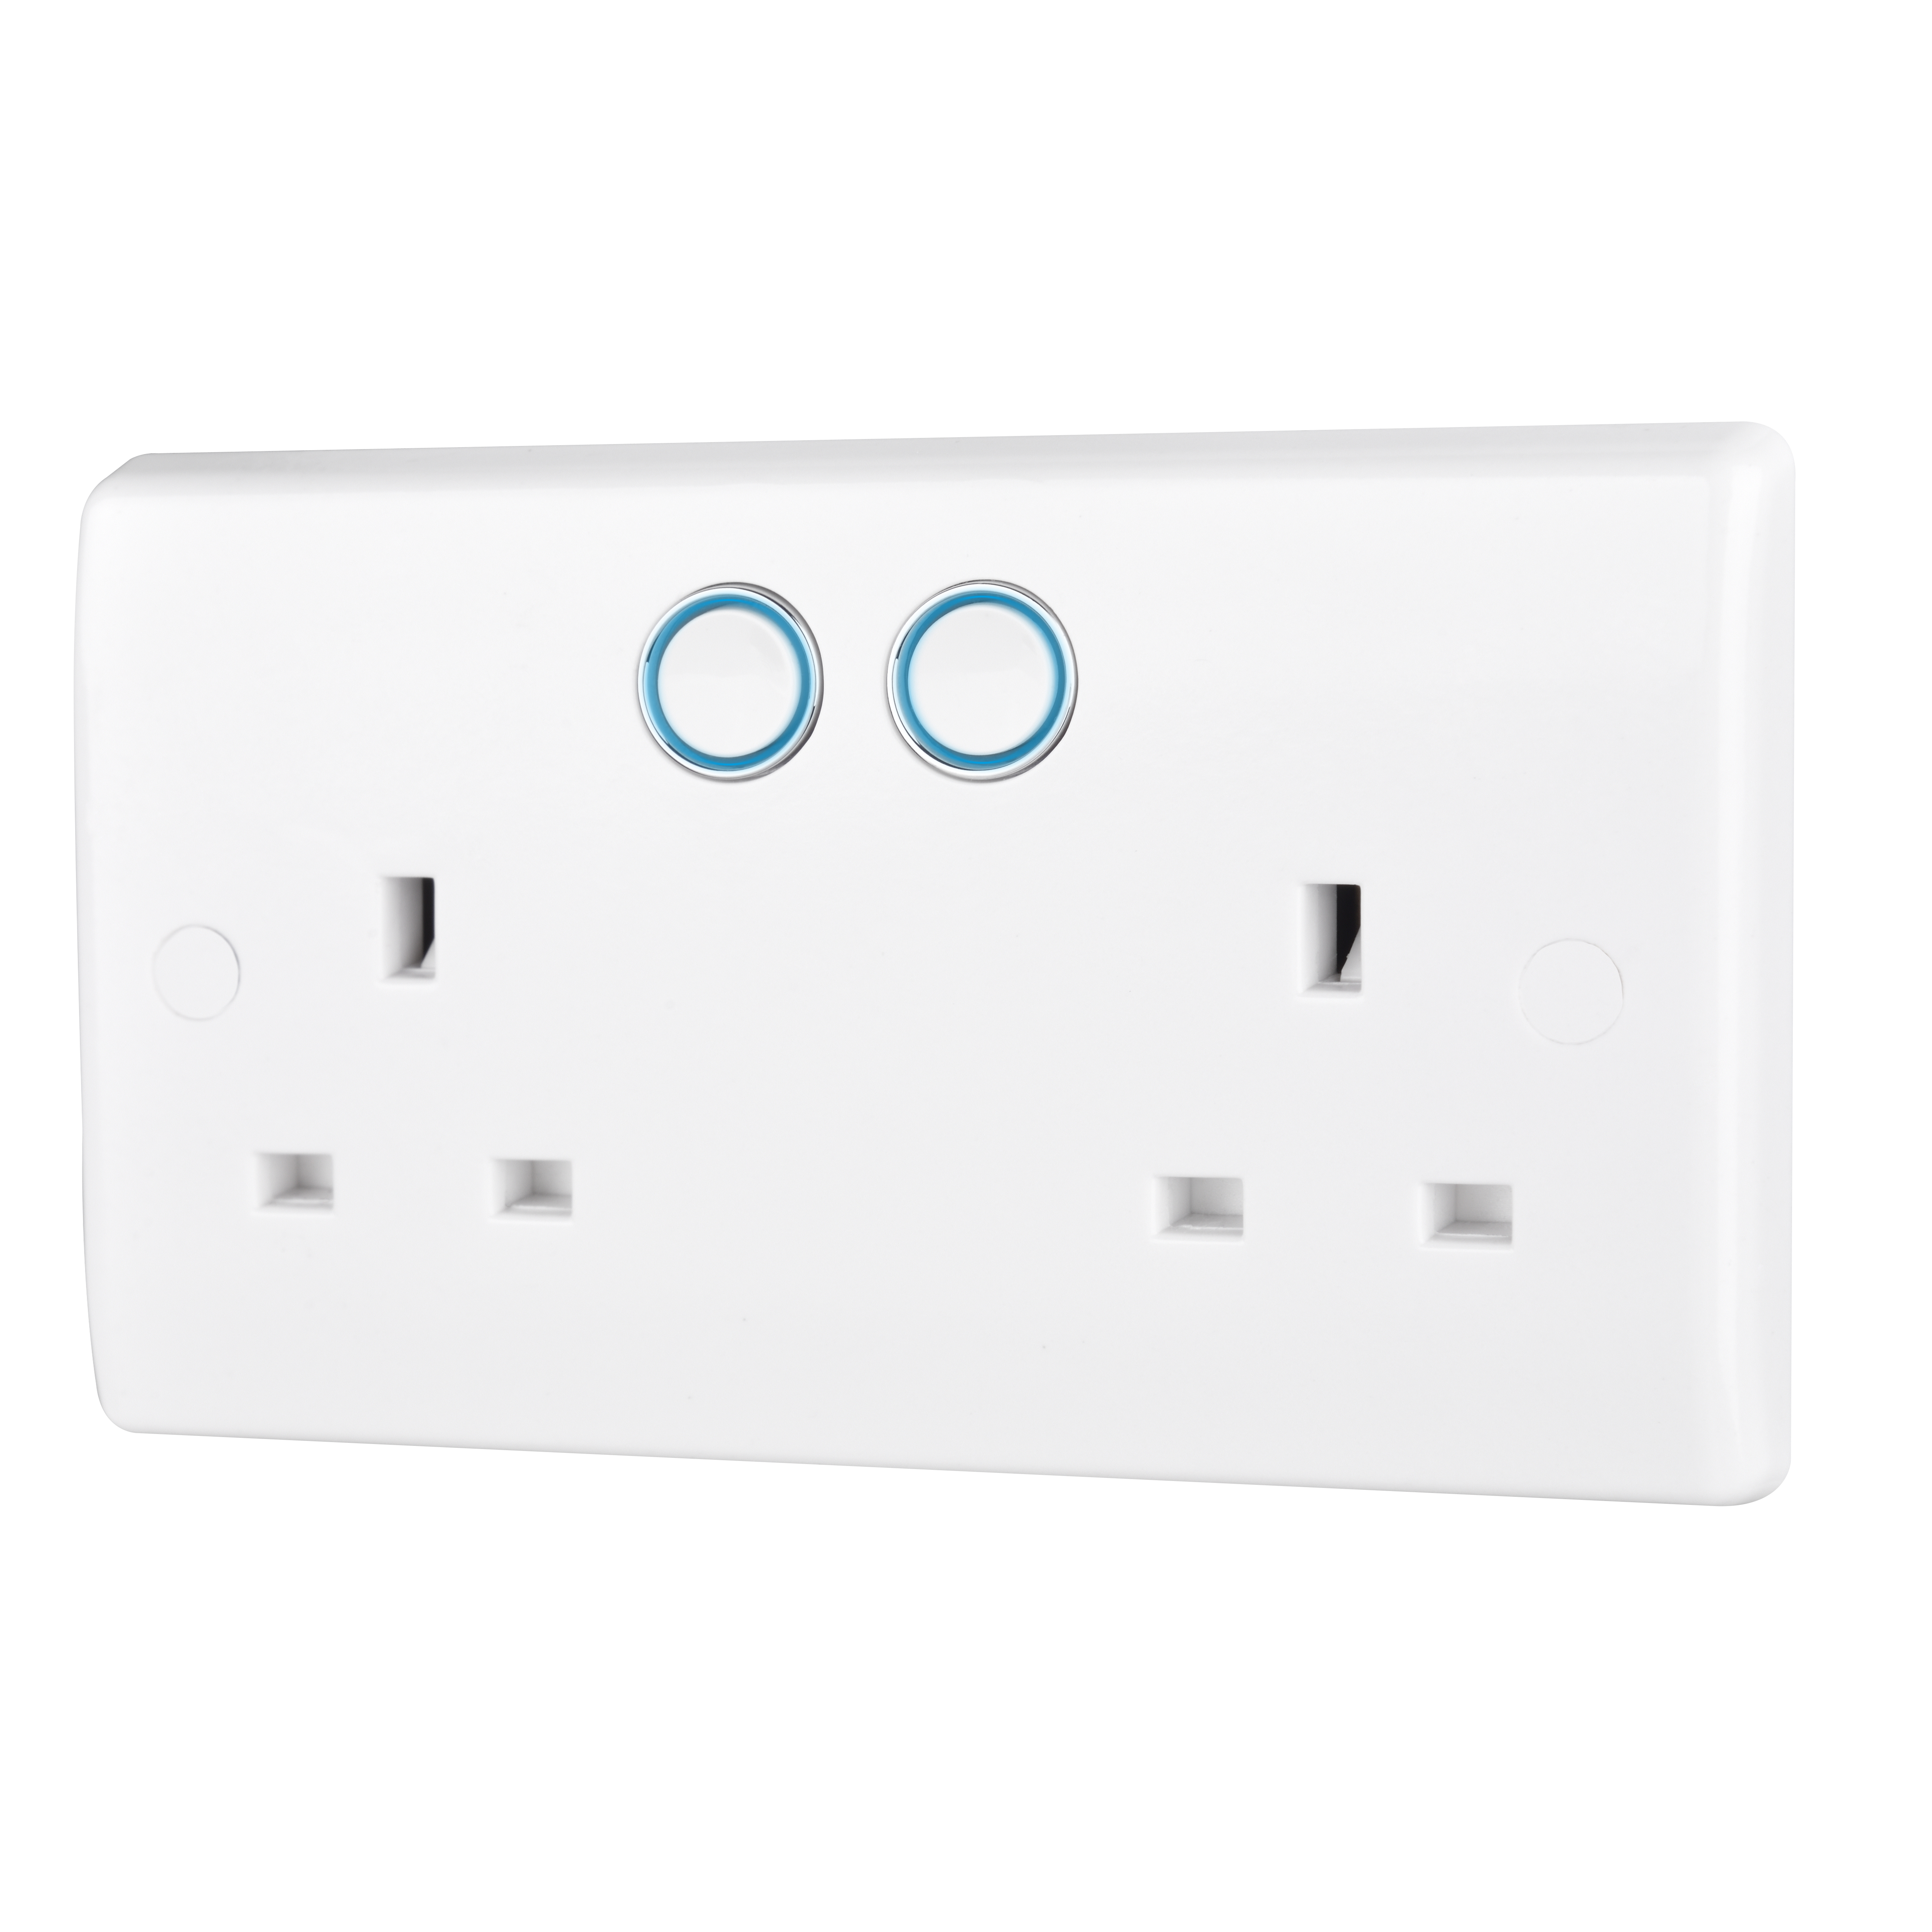 822HC_01-BGWifiControlledWallSocket(UK)-A1-screwcovers_On.png